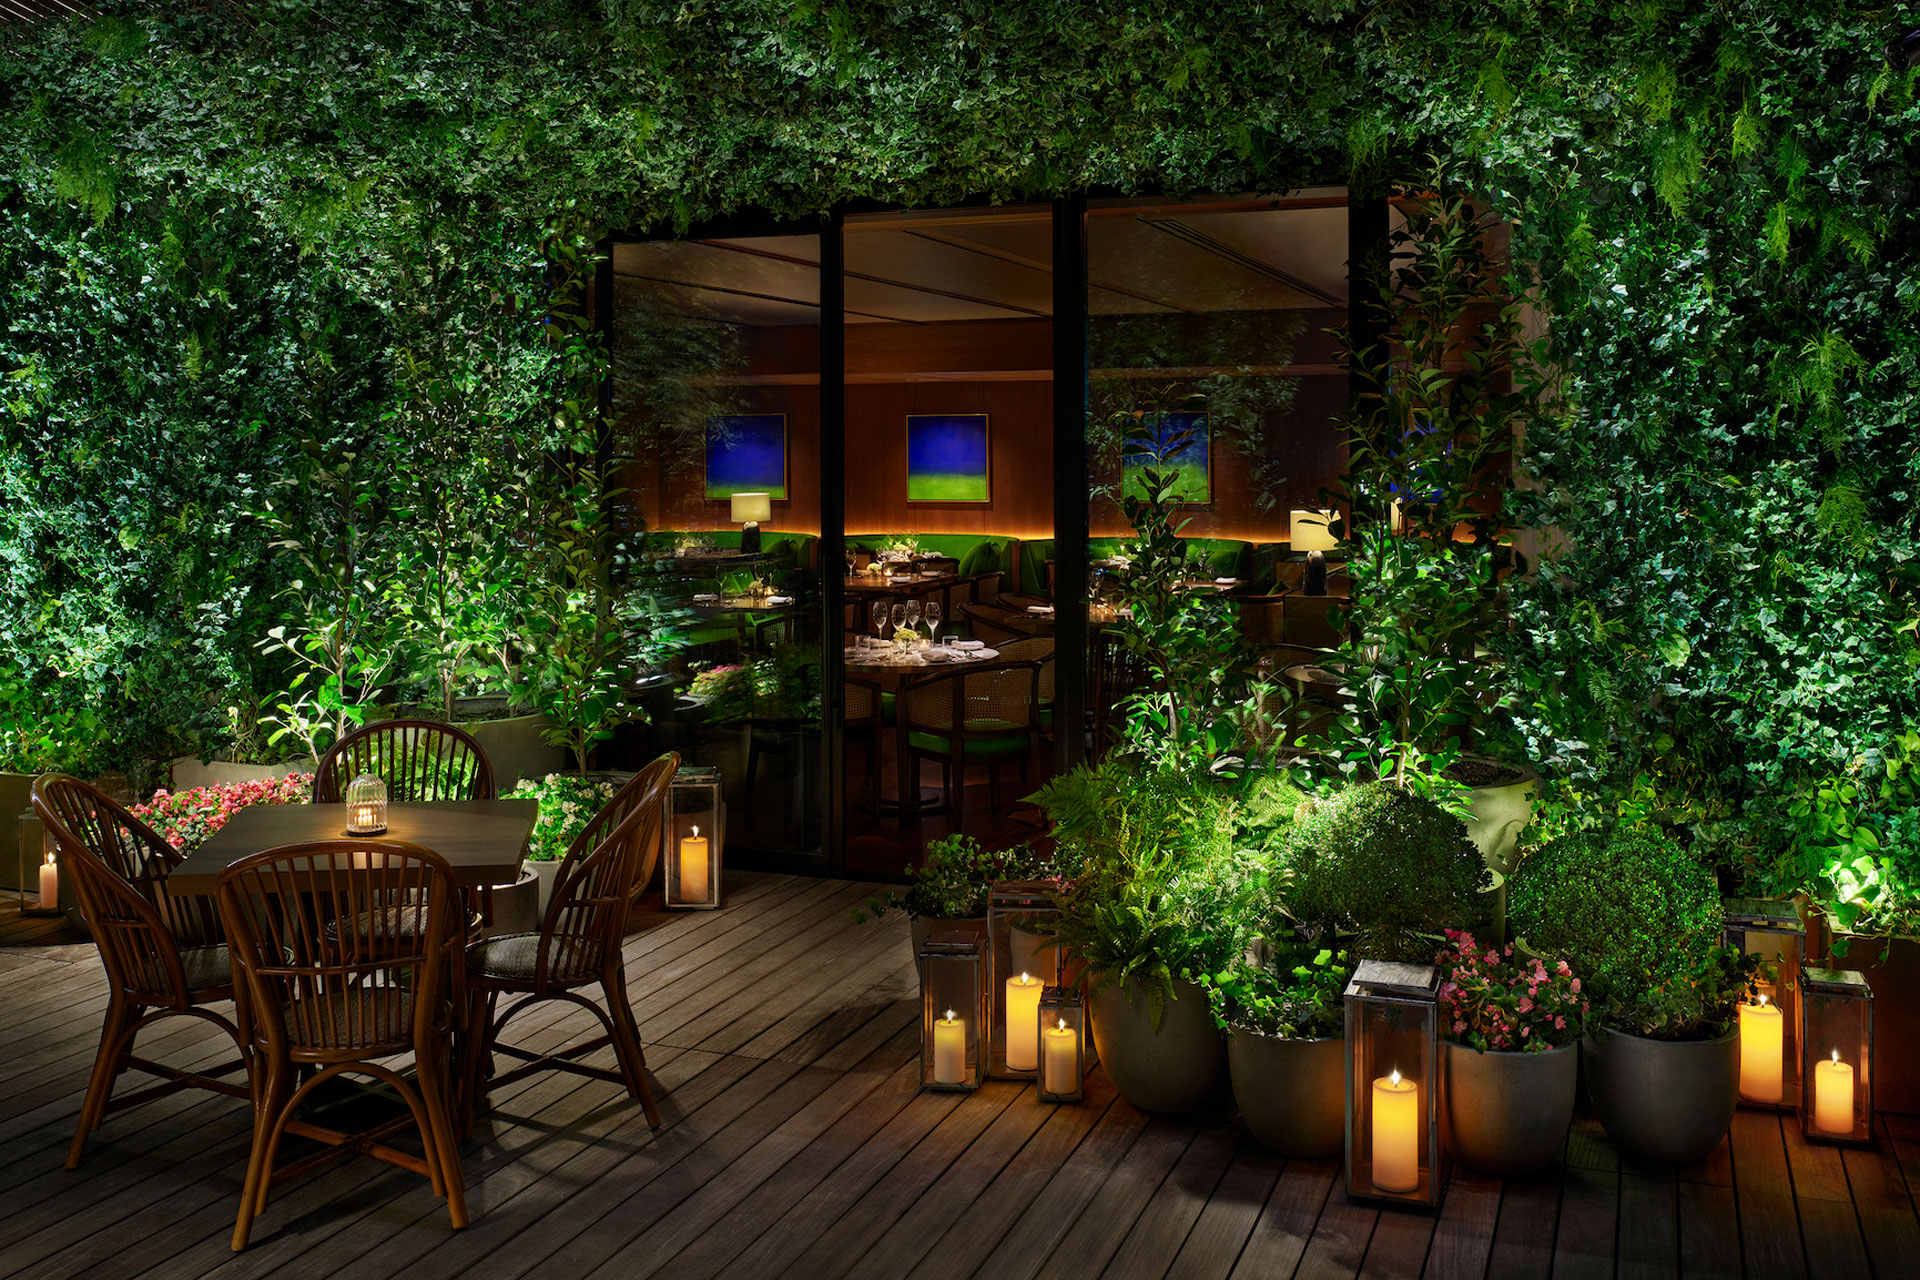 Restaurant balcony with greenery and candles